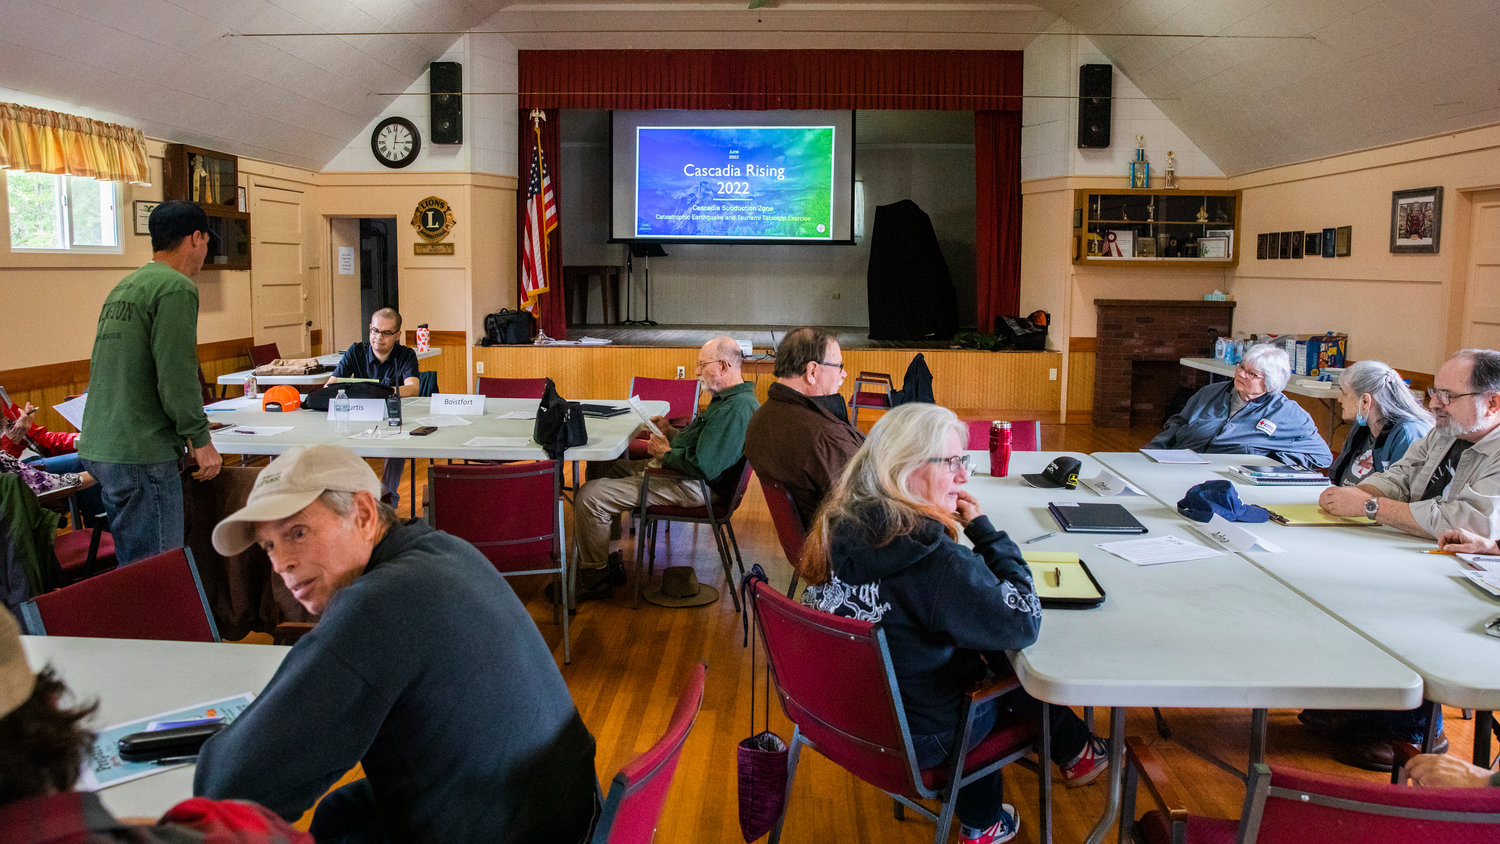 West Lewis County residents gather at the Baw Faw Grange on Monday to discuss the Cascadia Subduction Zone earthquake during one of several Lewis County earthquake preparedness meetings across the county this week.